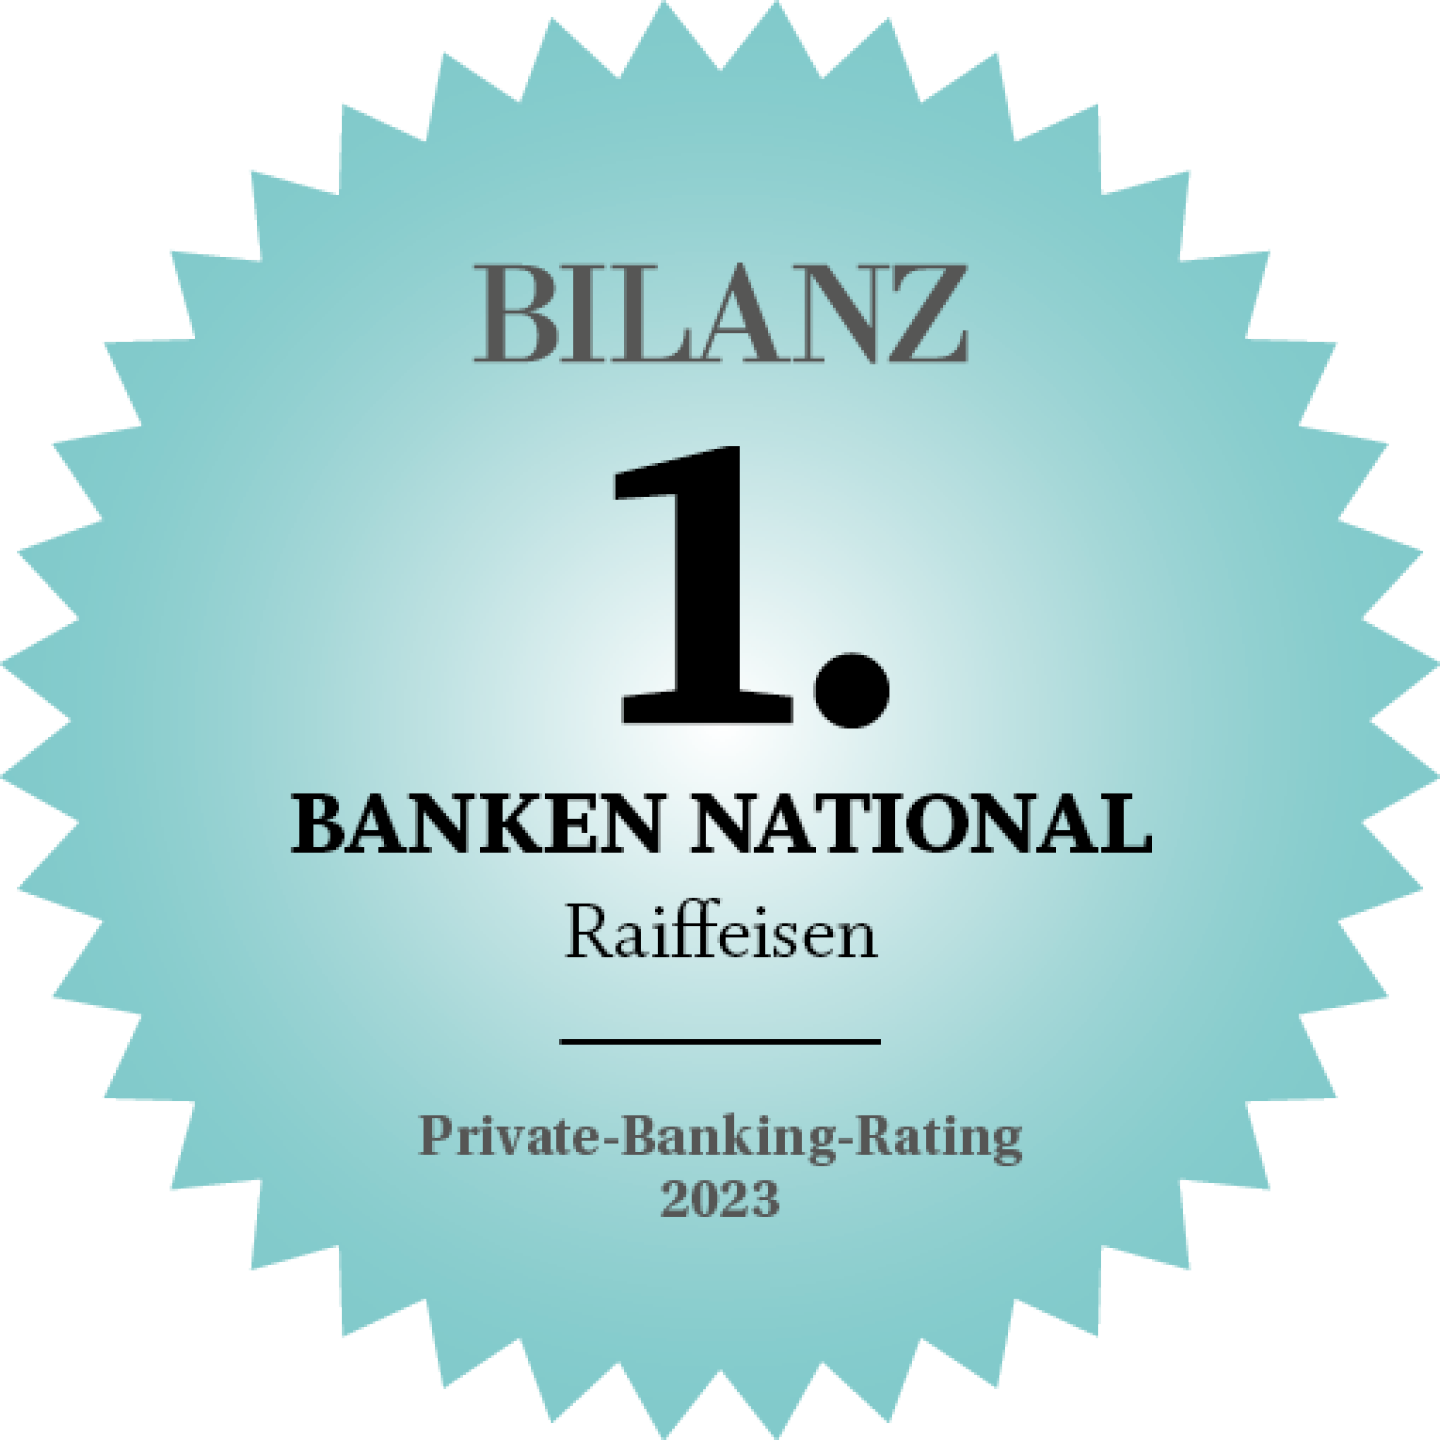 Private-Banking-Rating Siegel 2023